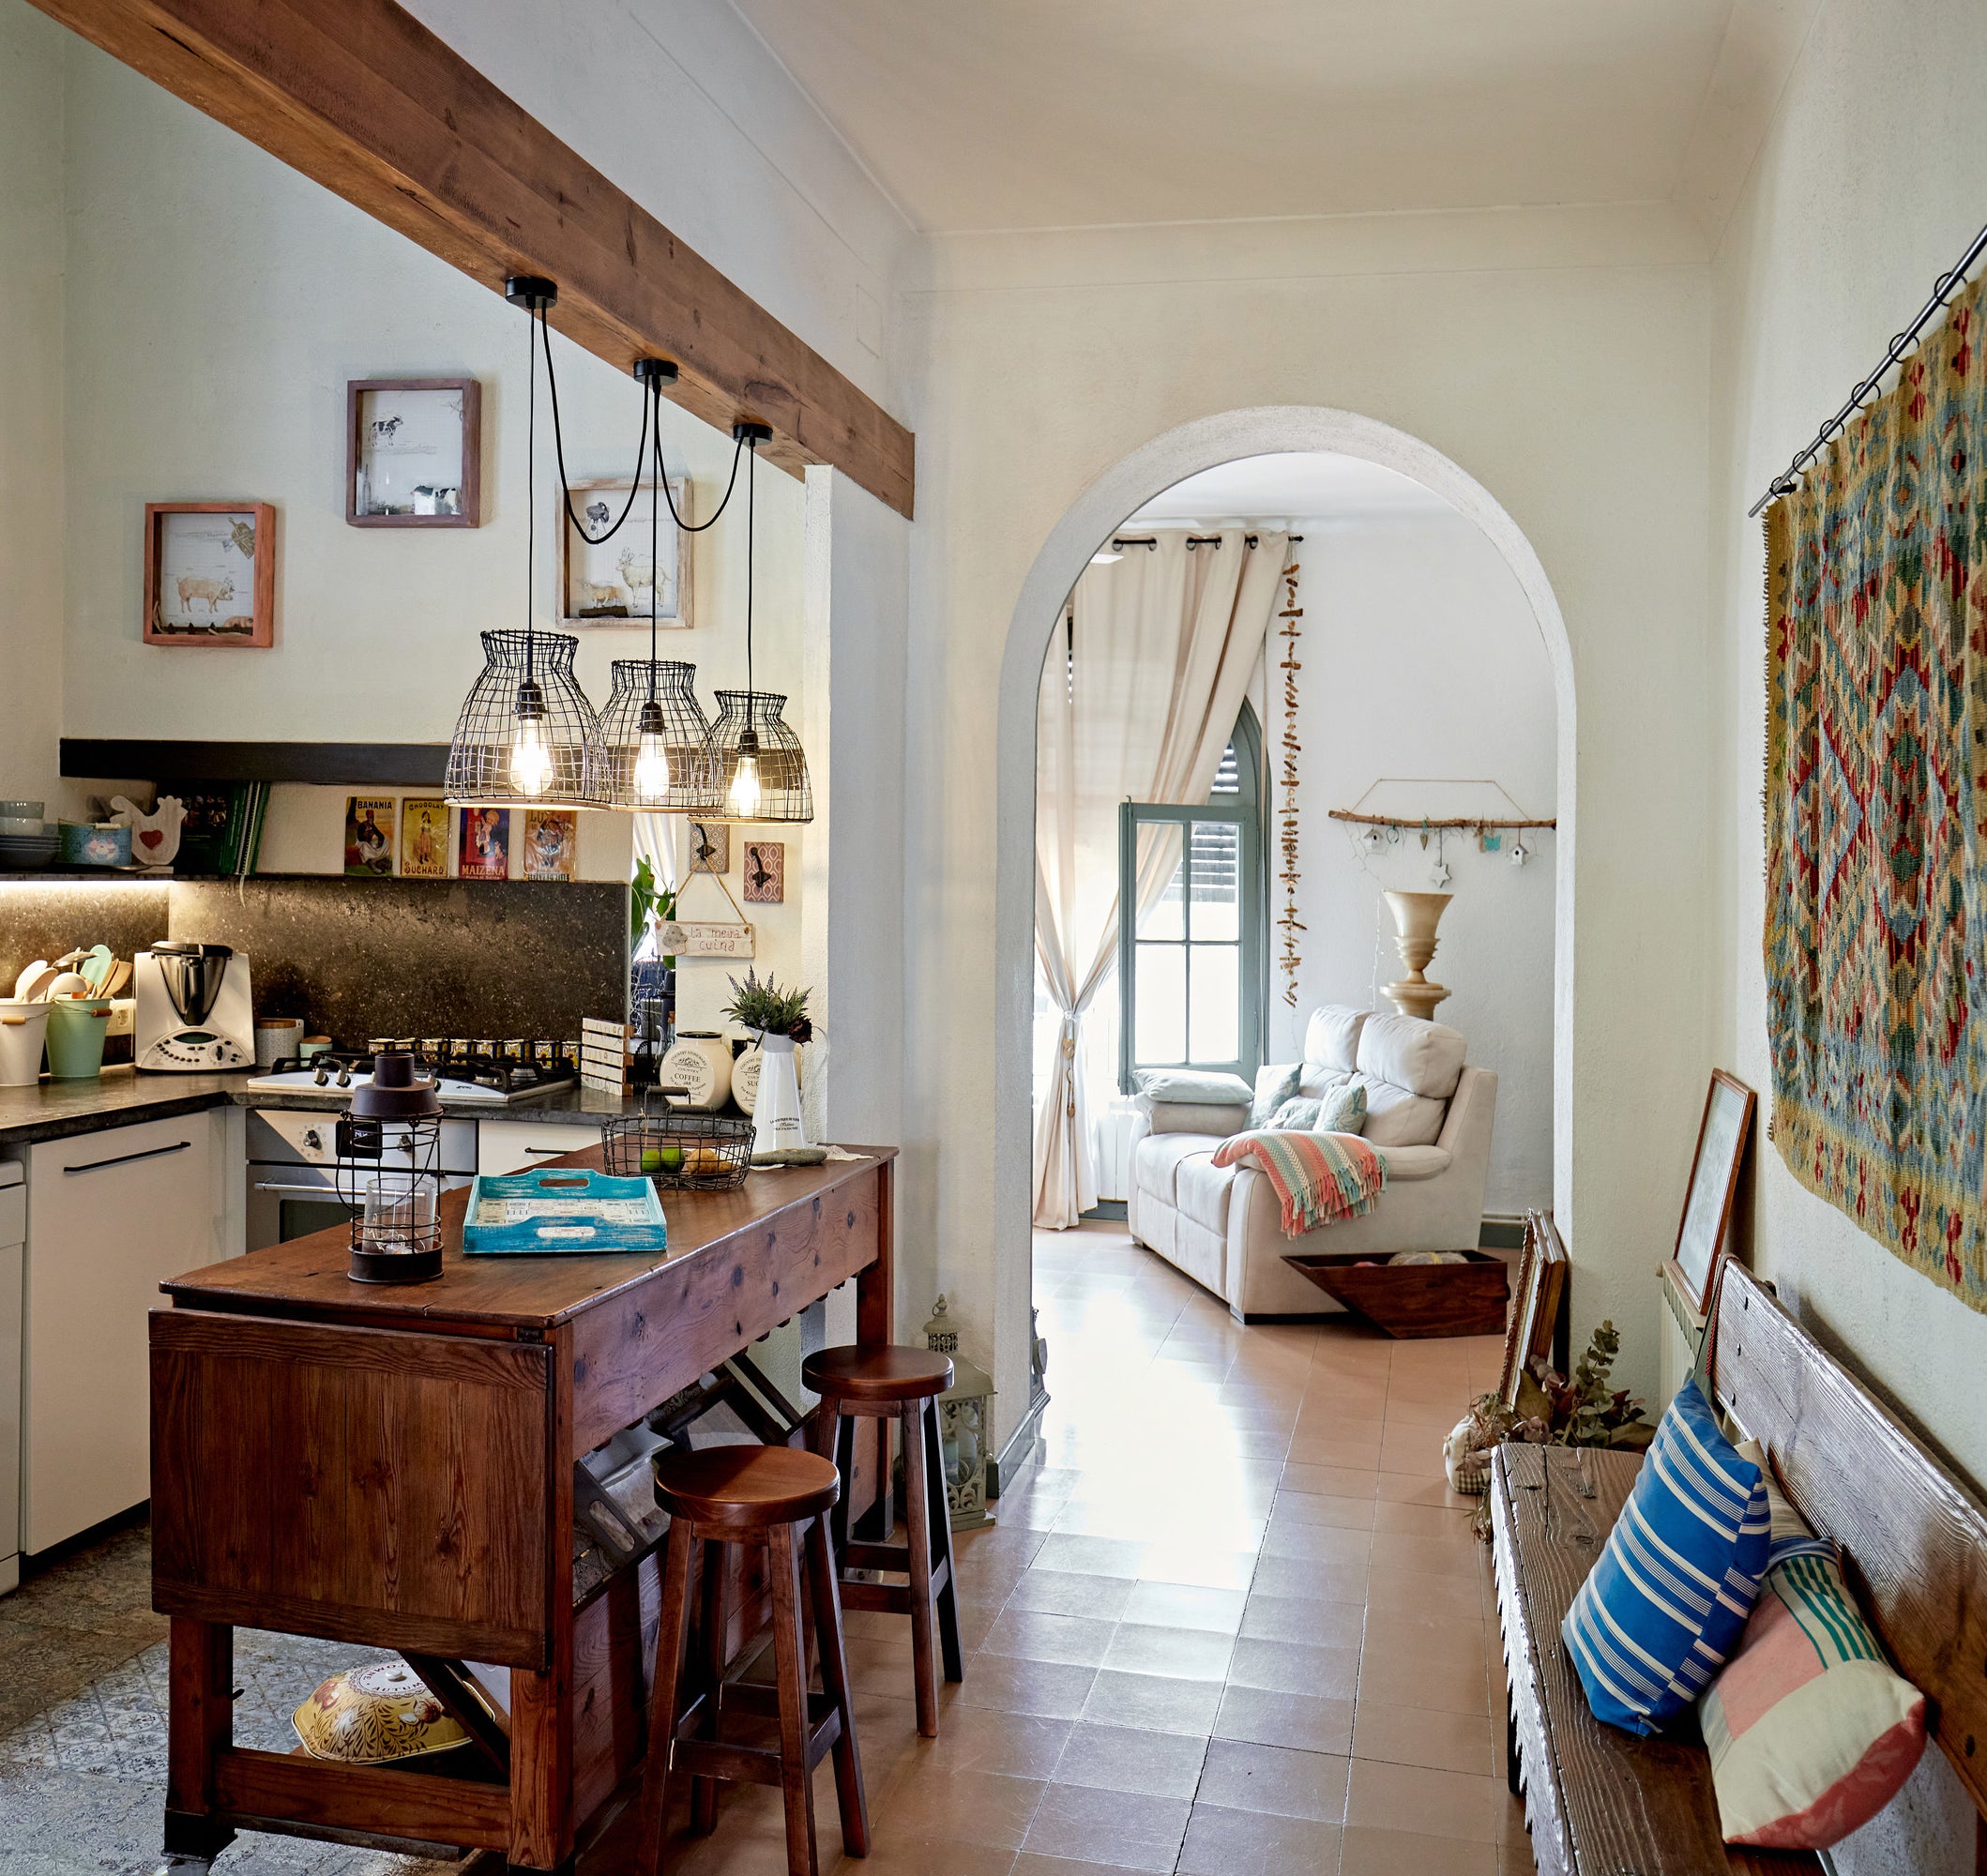 &quot;Maximalist&quot; kitchen and hallways with plenty of art, pictures, and ornate decorations that show personality